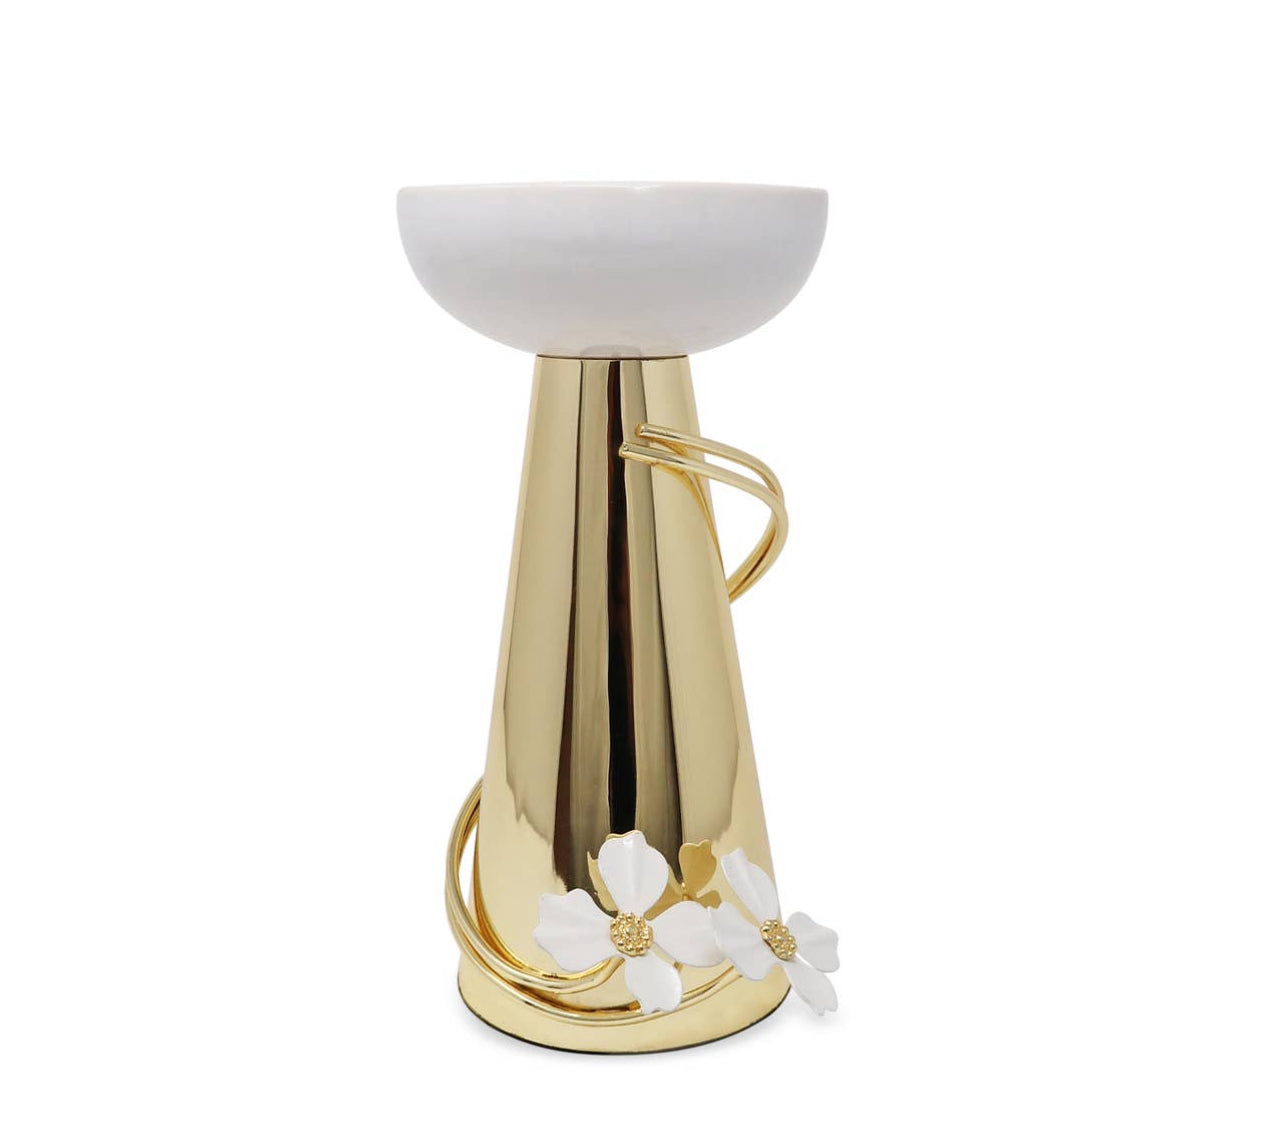 Porcelain Candlestick with Jewel Flower Detail